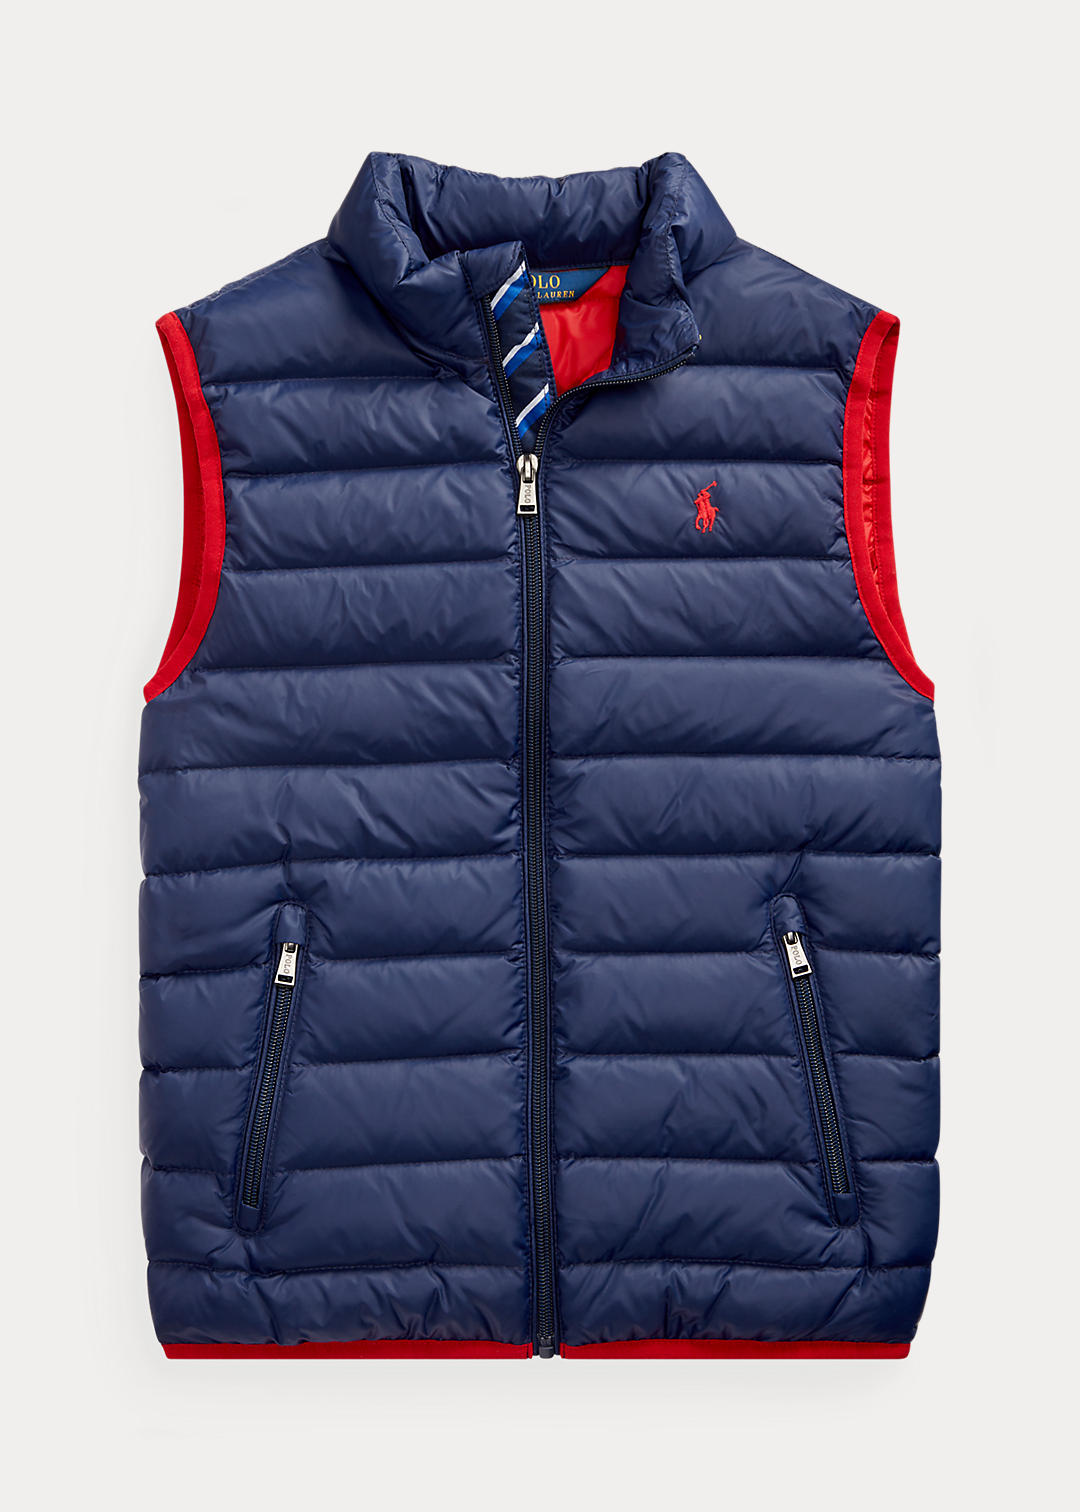 BOYS 6-14 YEARS Packable Quilted Down Vest 1